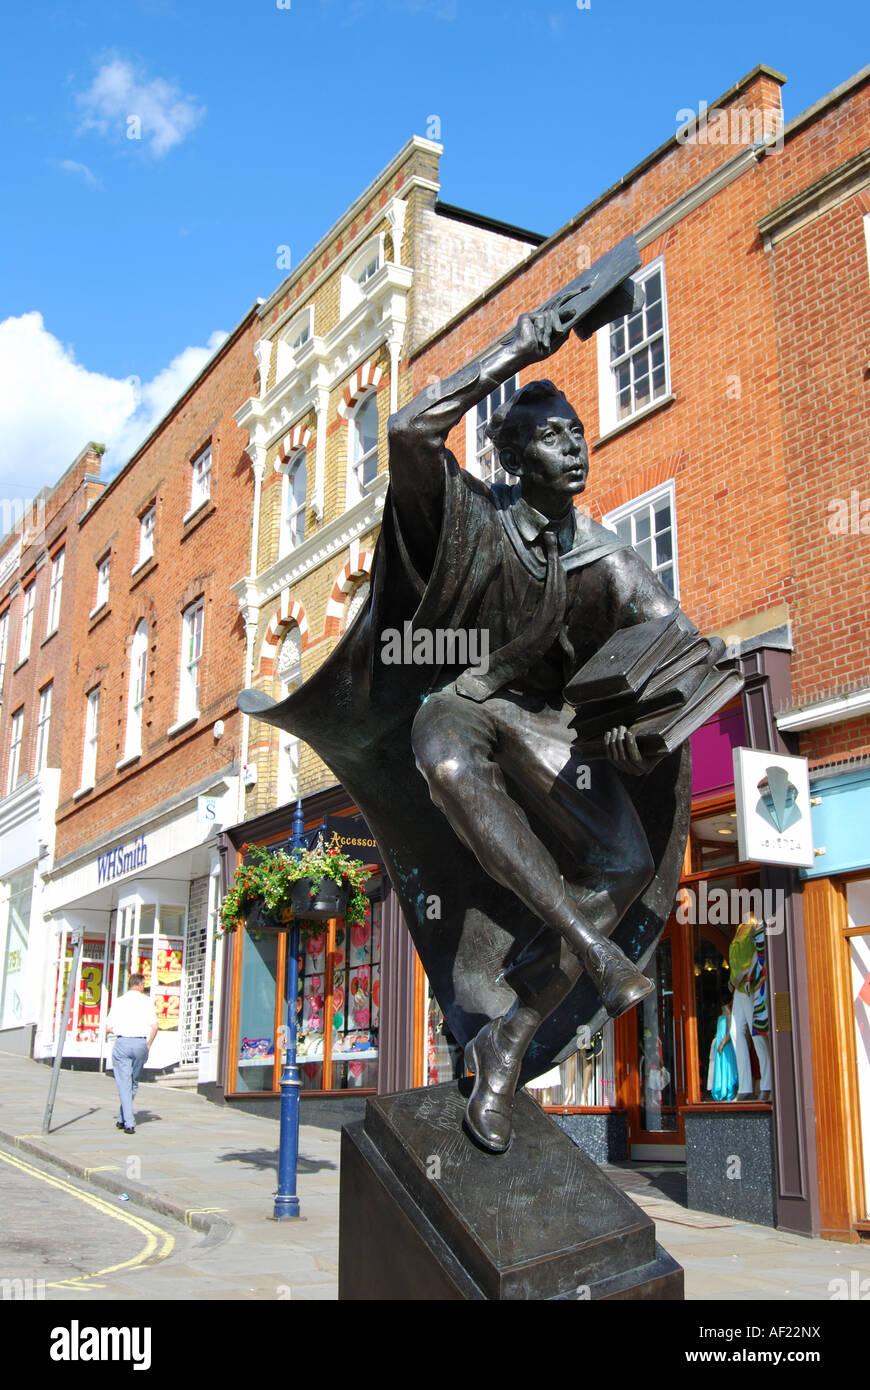 ‘Surrey Scholar’ statue in The High Street, Guildford, Surrey, England, United Kingdom Stock Photo